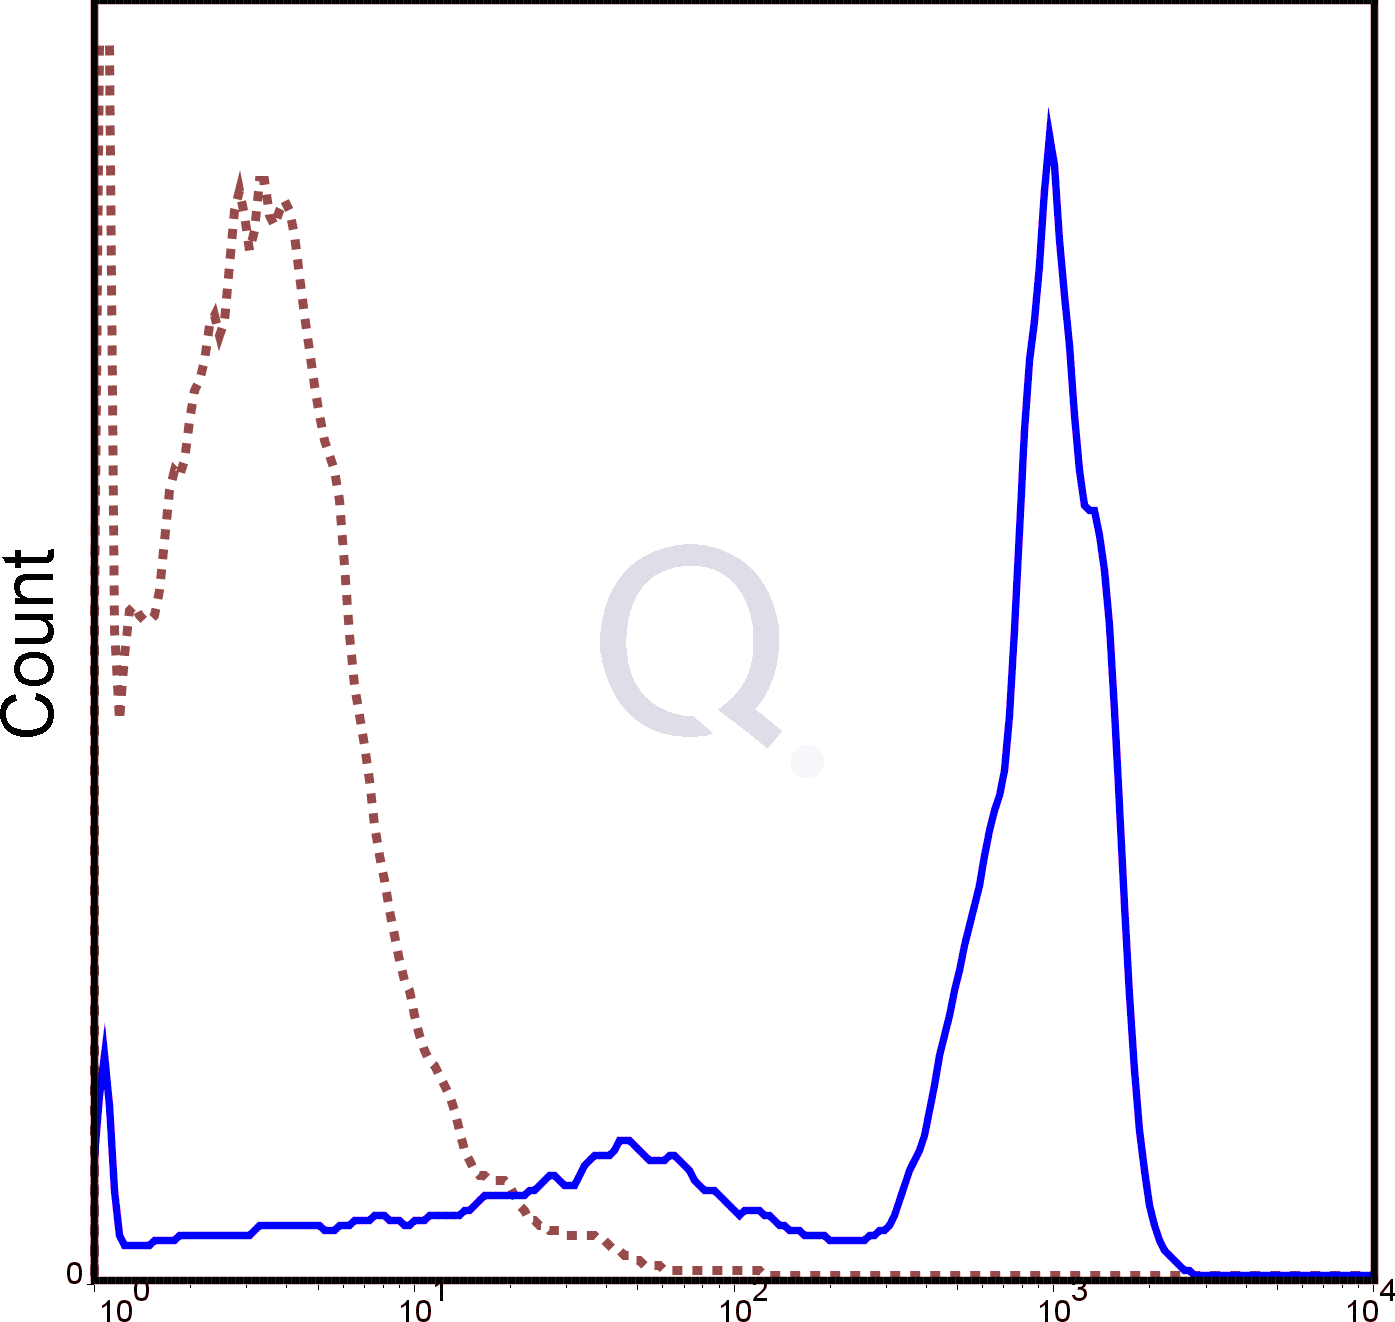 C57Bl/6 splenocytes were stained with 0.5 ug PE Mouse Anti-CD45.2 (QAB43) (solid line) or 0.5 ug PE Mouse IgG2a isotype control (dashed line). Flow Cytometry Data from 10,000 events.